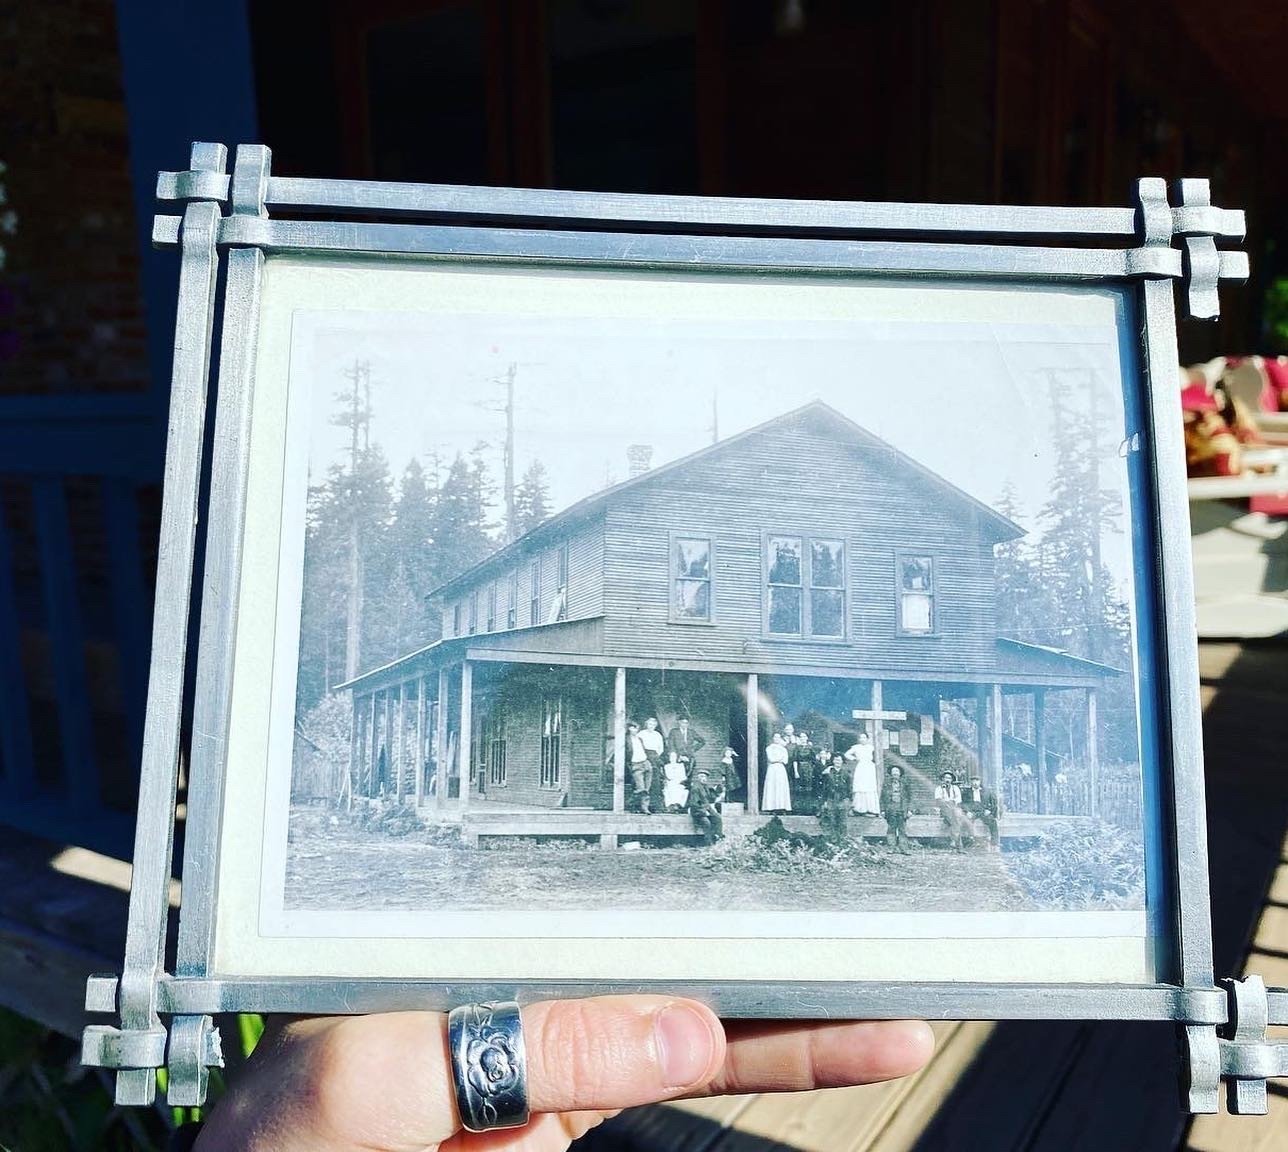 A photograph of the historic Hotel Packwood from the early 1900s is held.